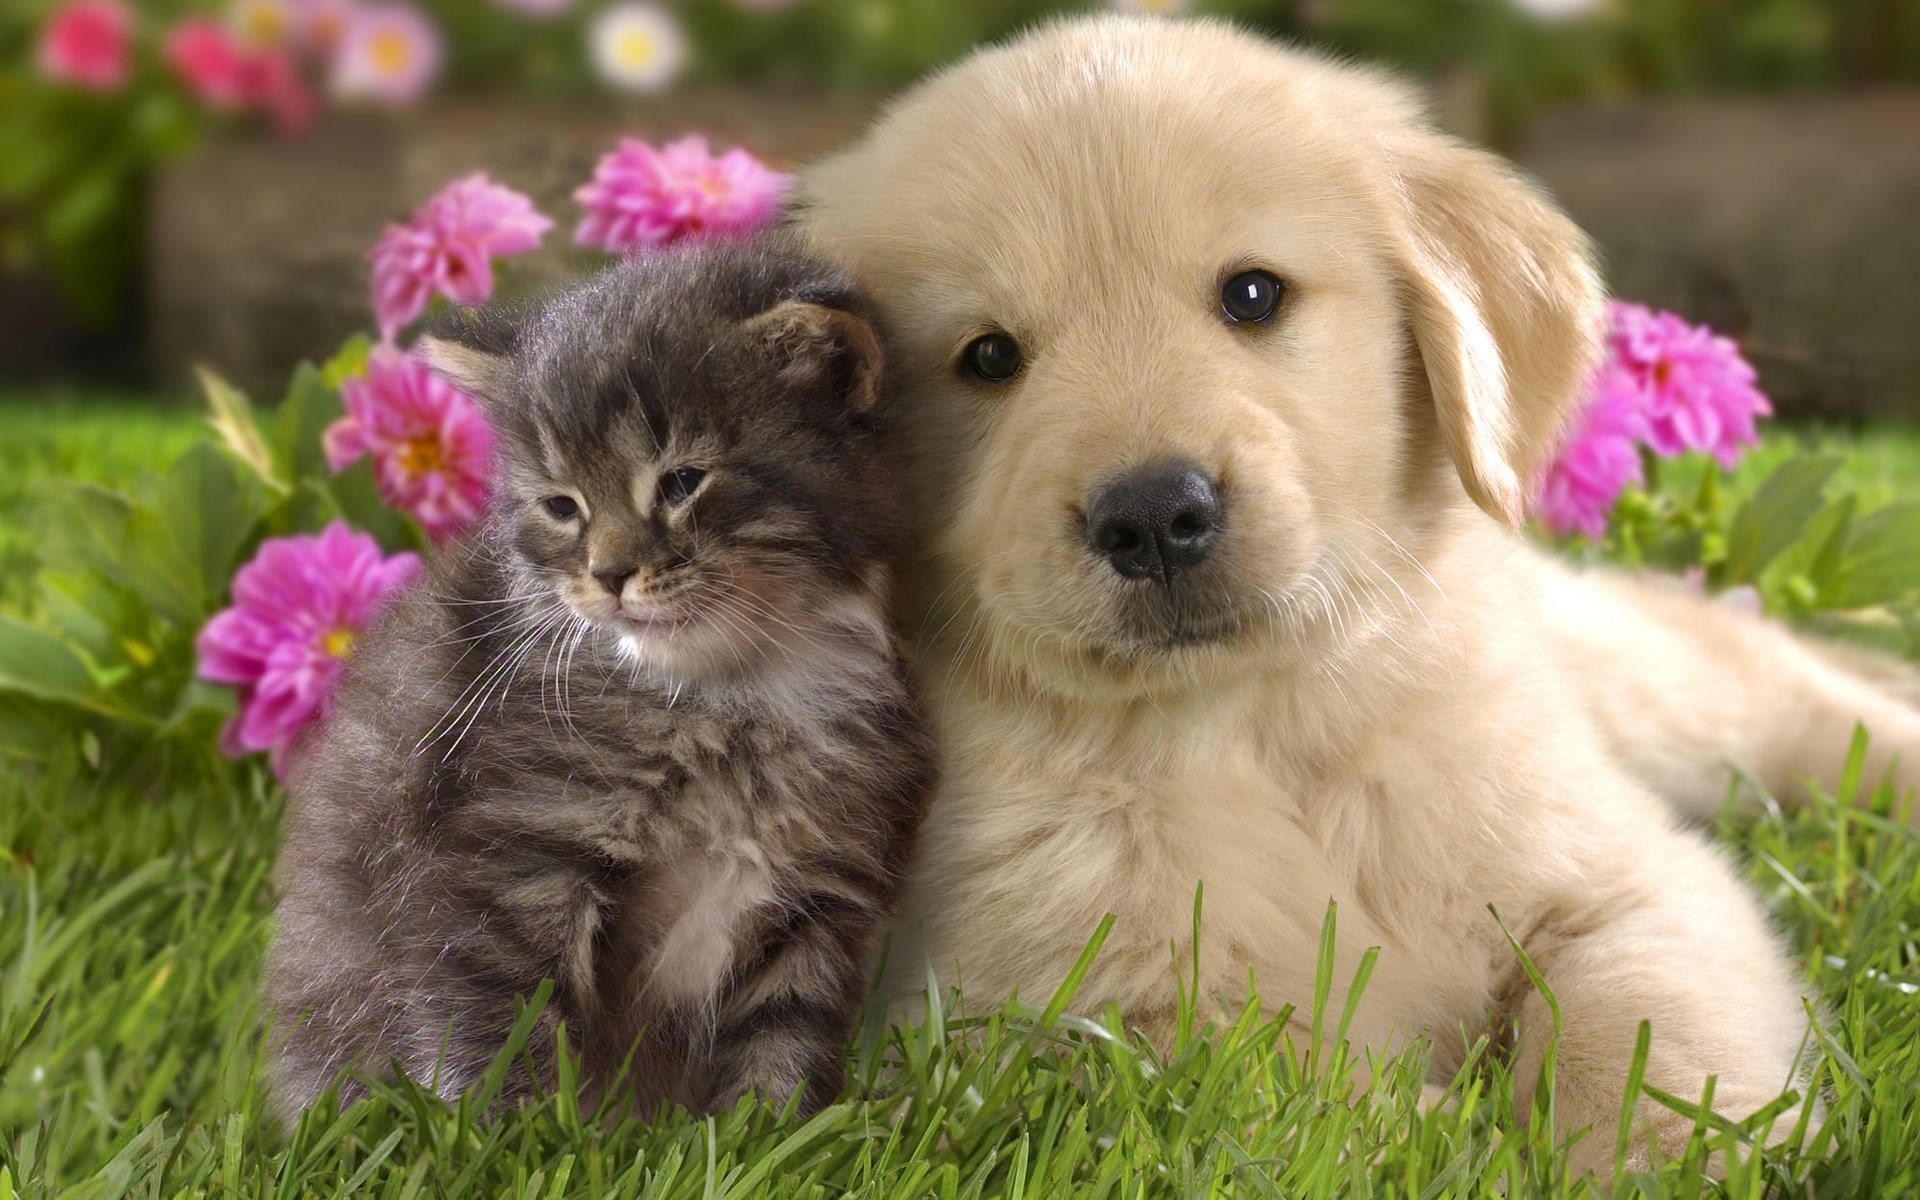 Download Cute Kitten And Puppy Wallpaper Free Wallpapers - PetPictures